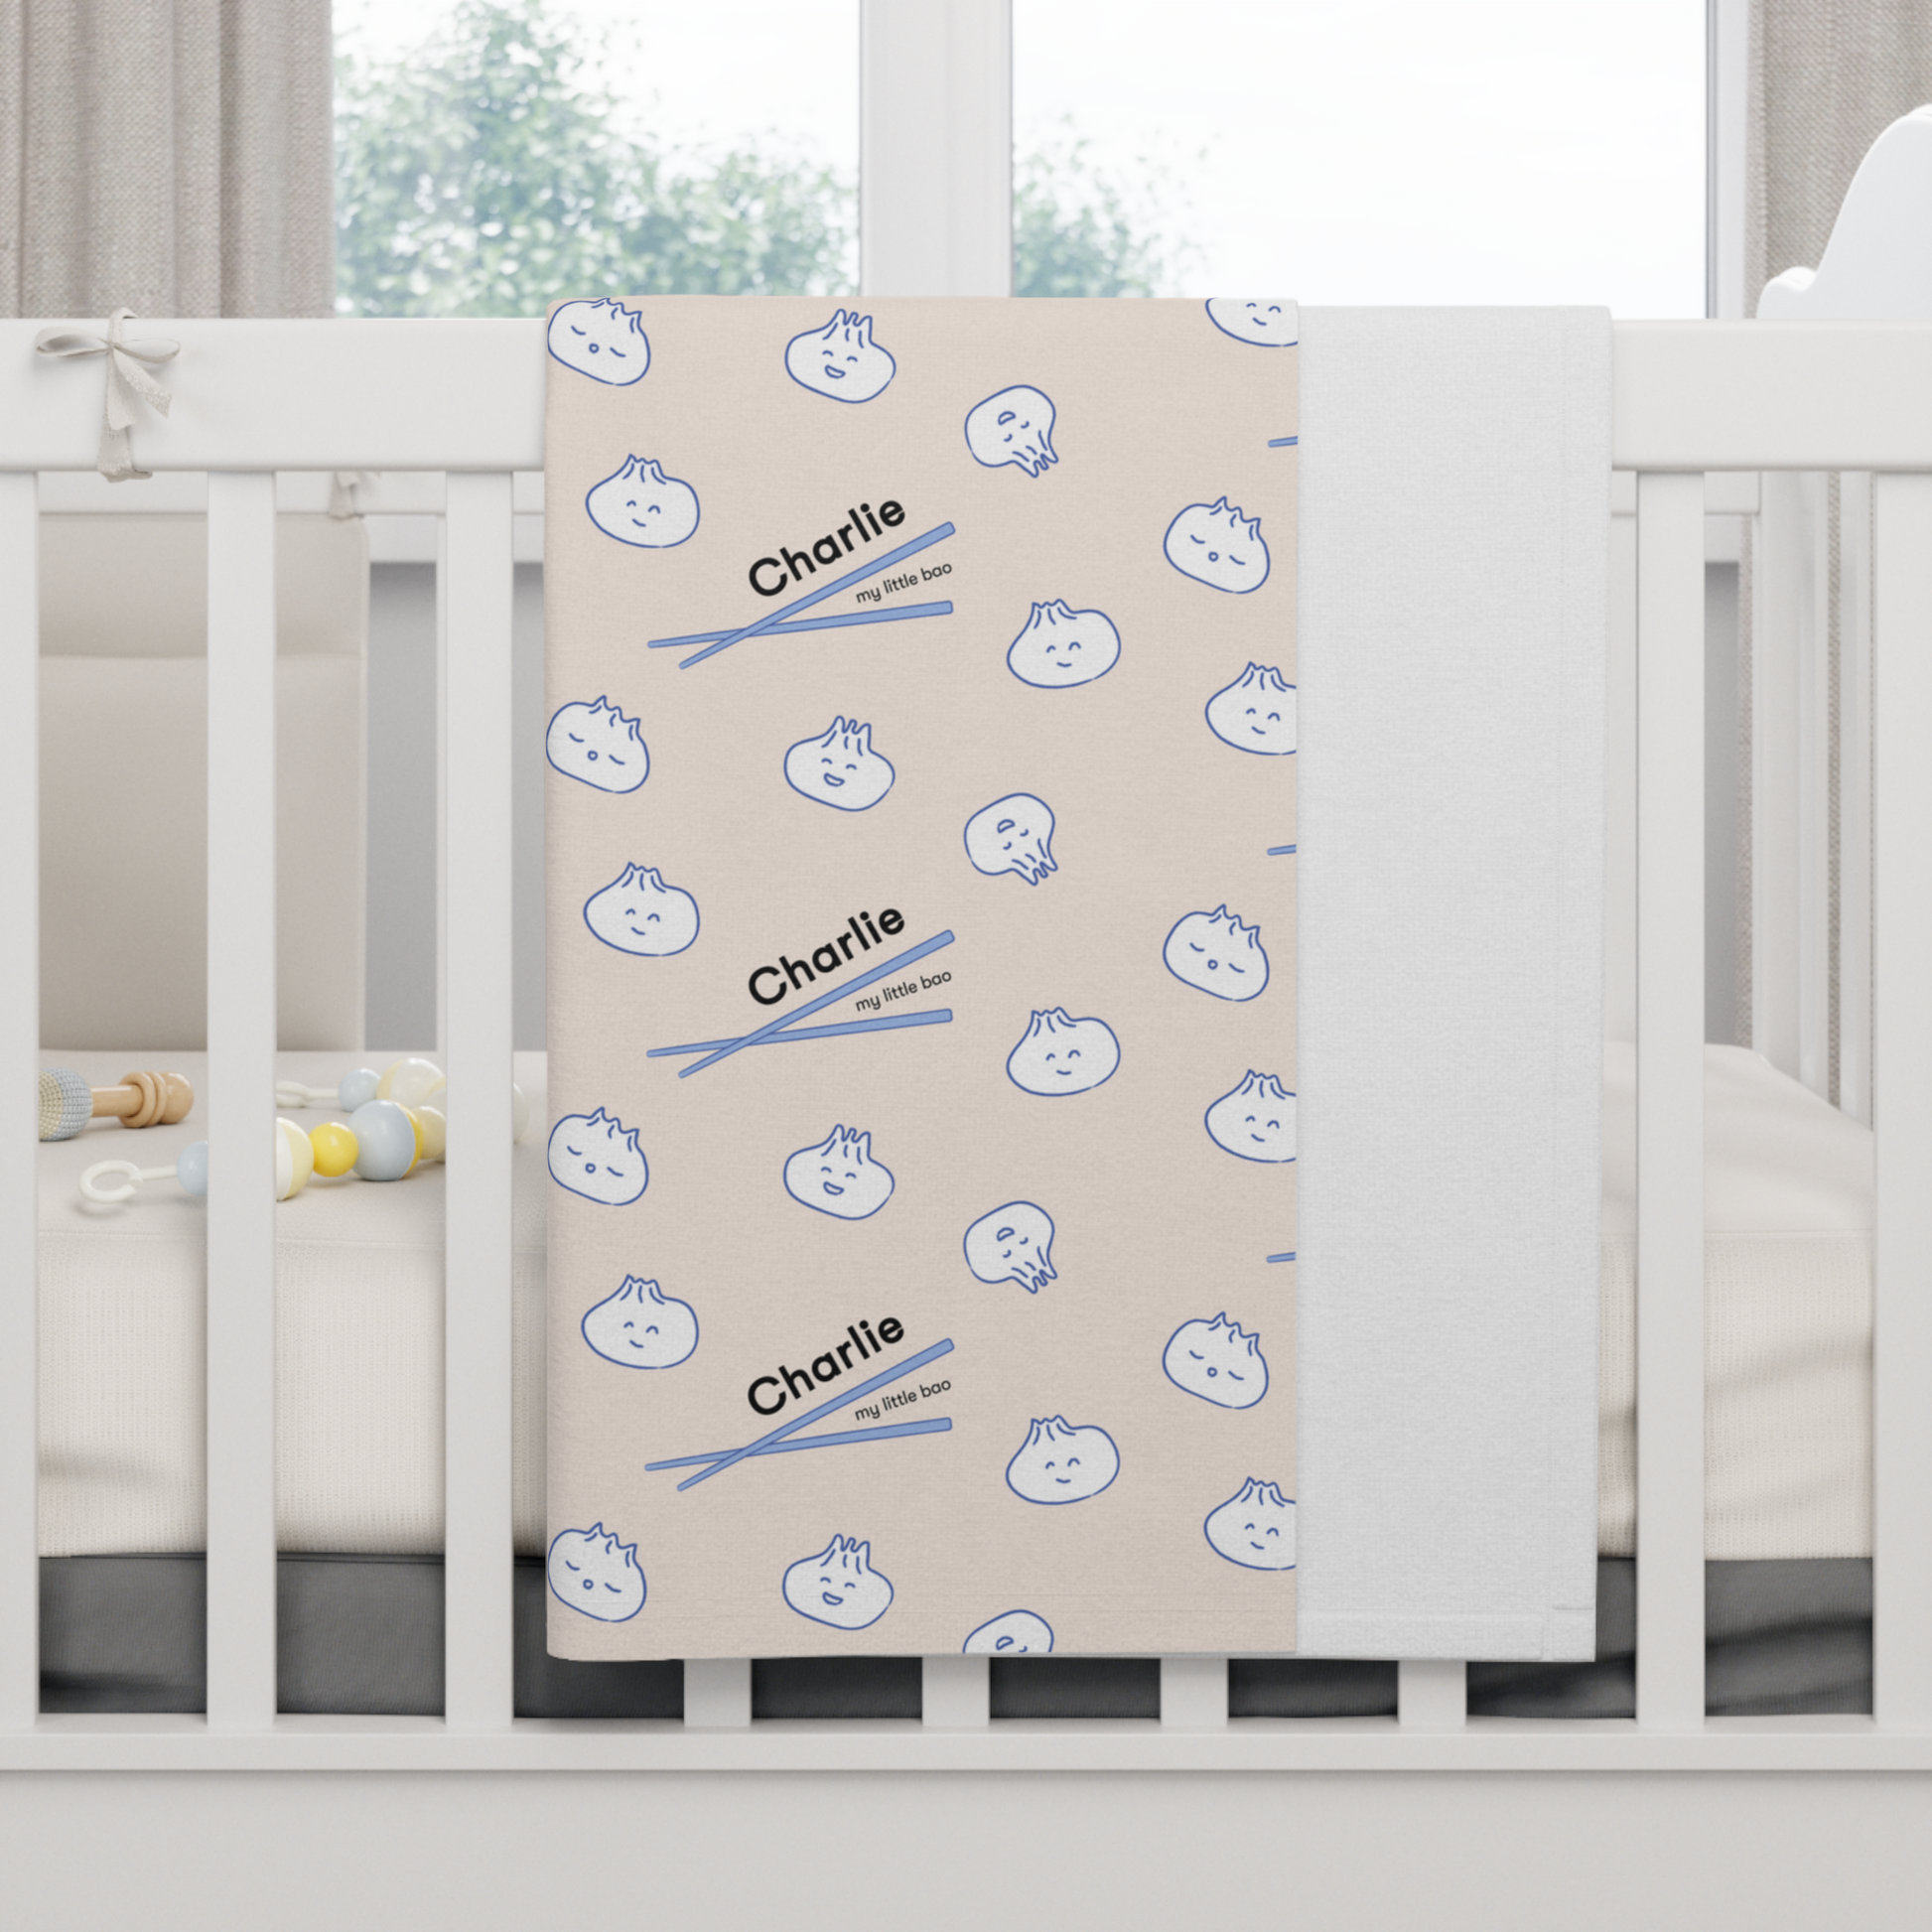 Fleece personalized baby blanket in bao bun pattern hung over side of white crib with window in the background